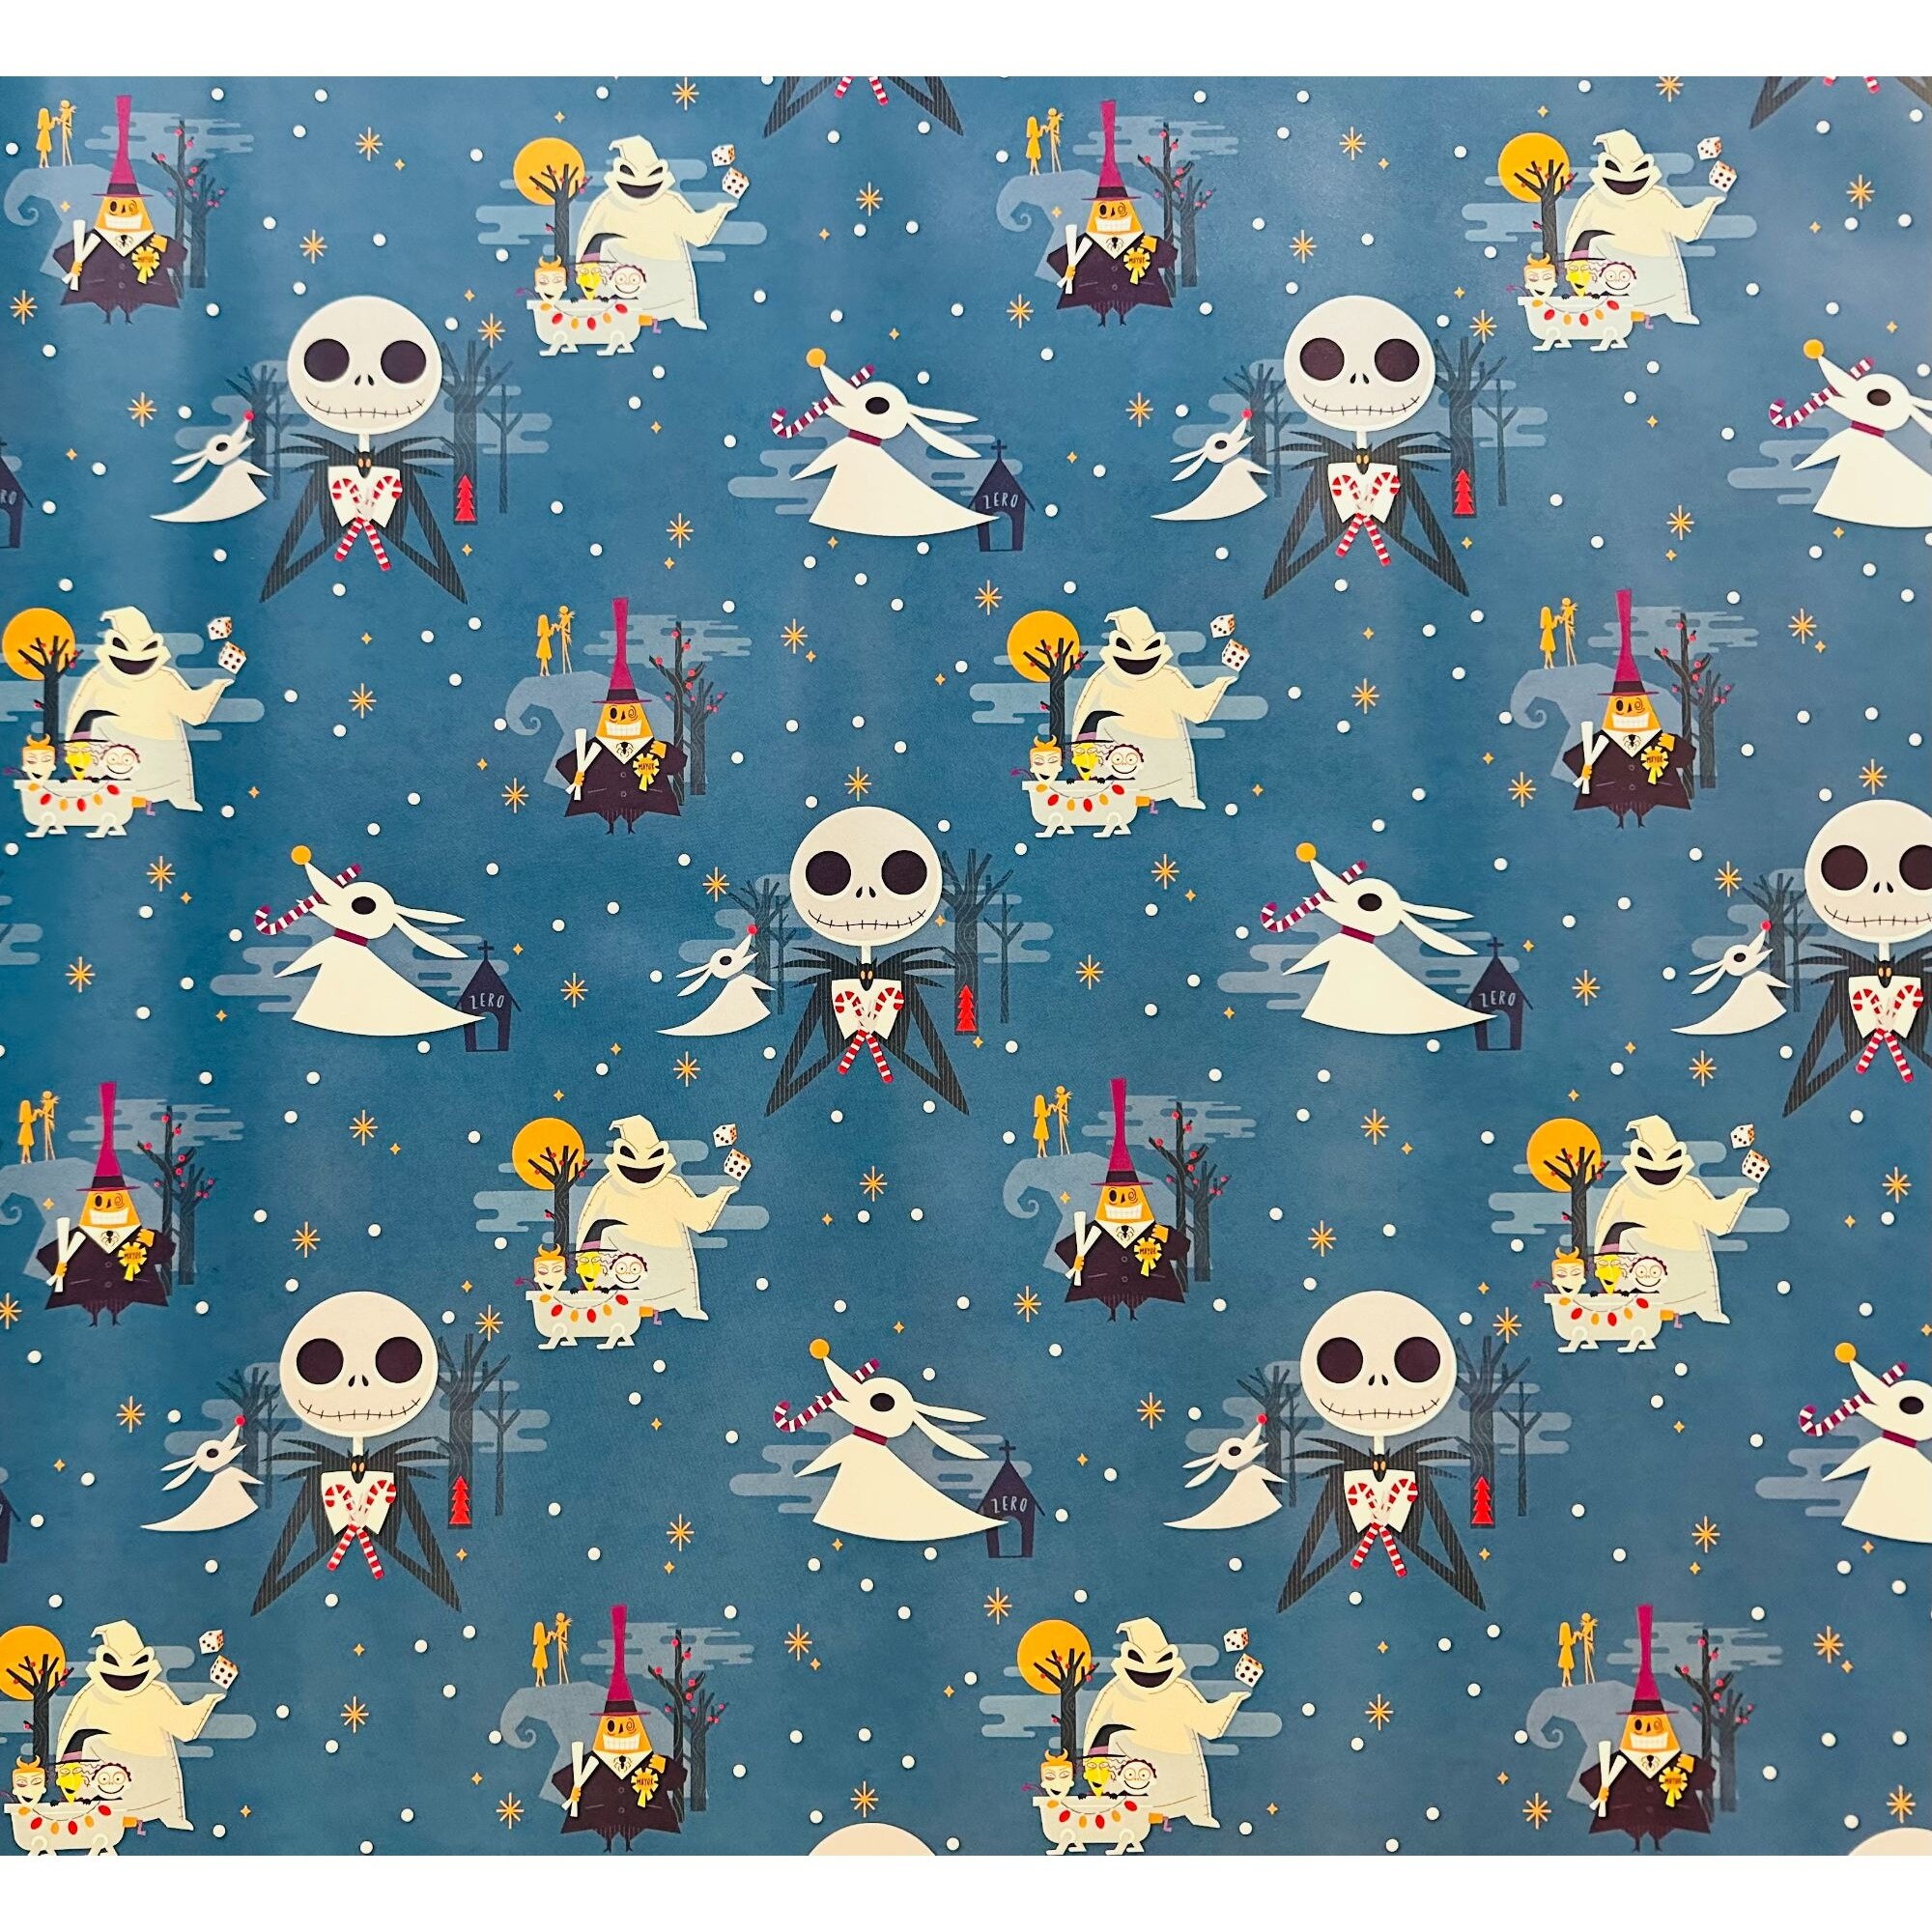 Disney Nightmare Before Christmas 70sqft Wrapping Paper Green w